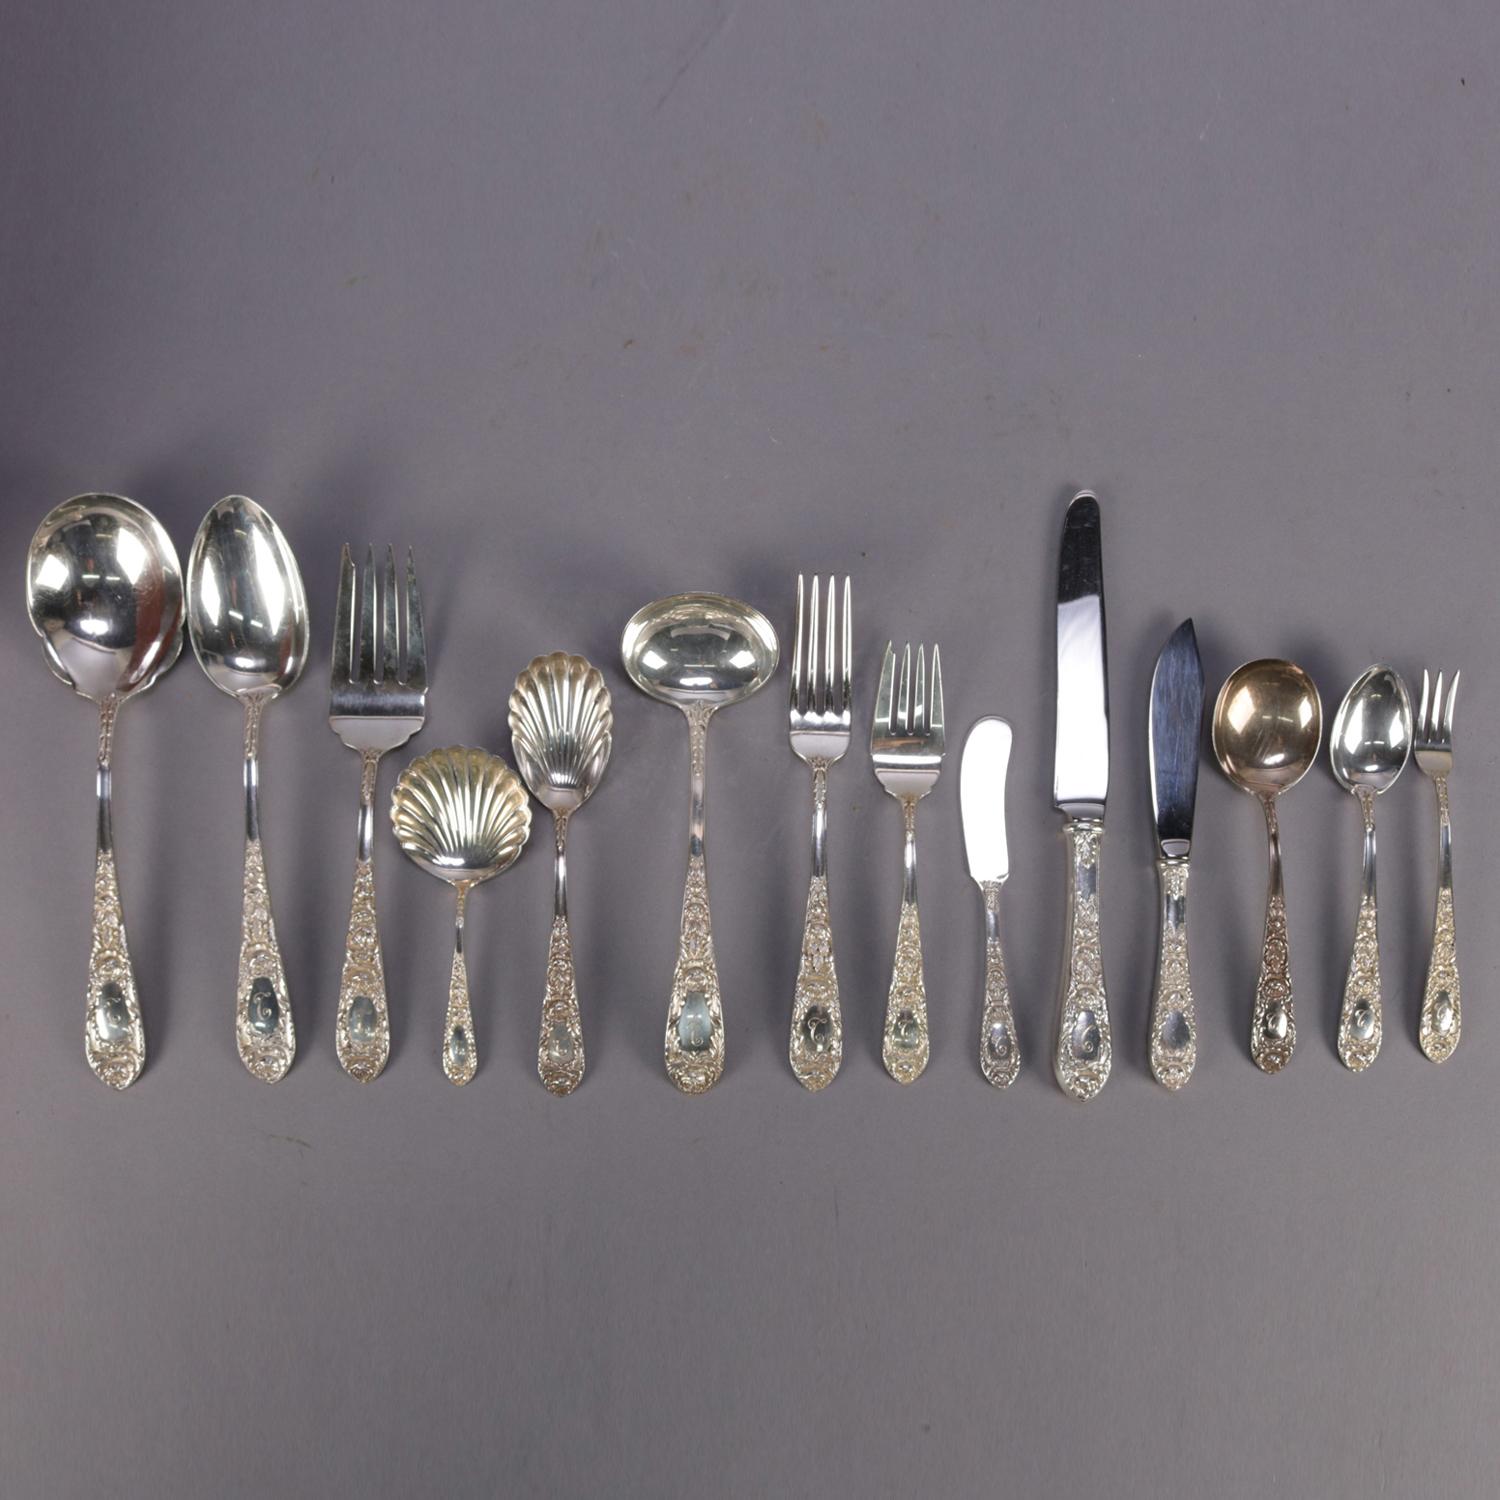 72 piece sterling silver flatware set by S. Kirk & Son Inc features the floral high relief Stieff Rose pattern with monogrammed 